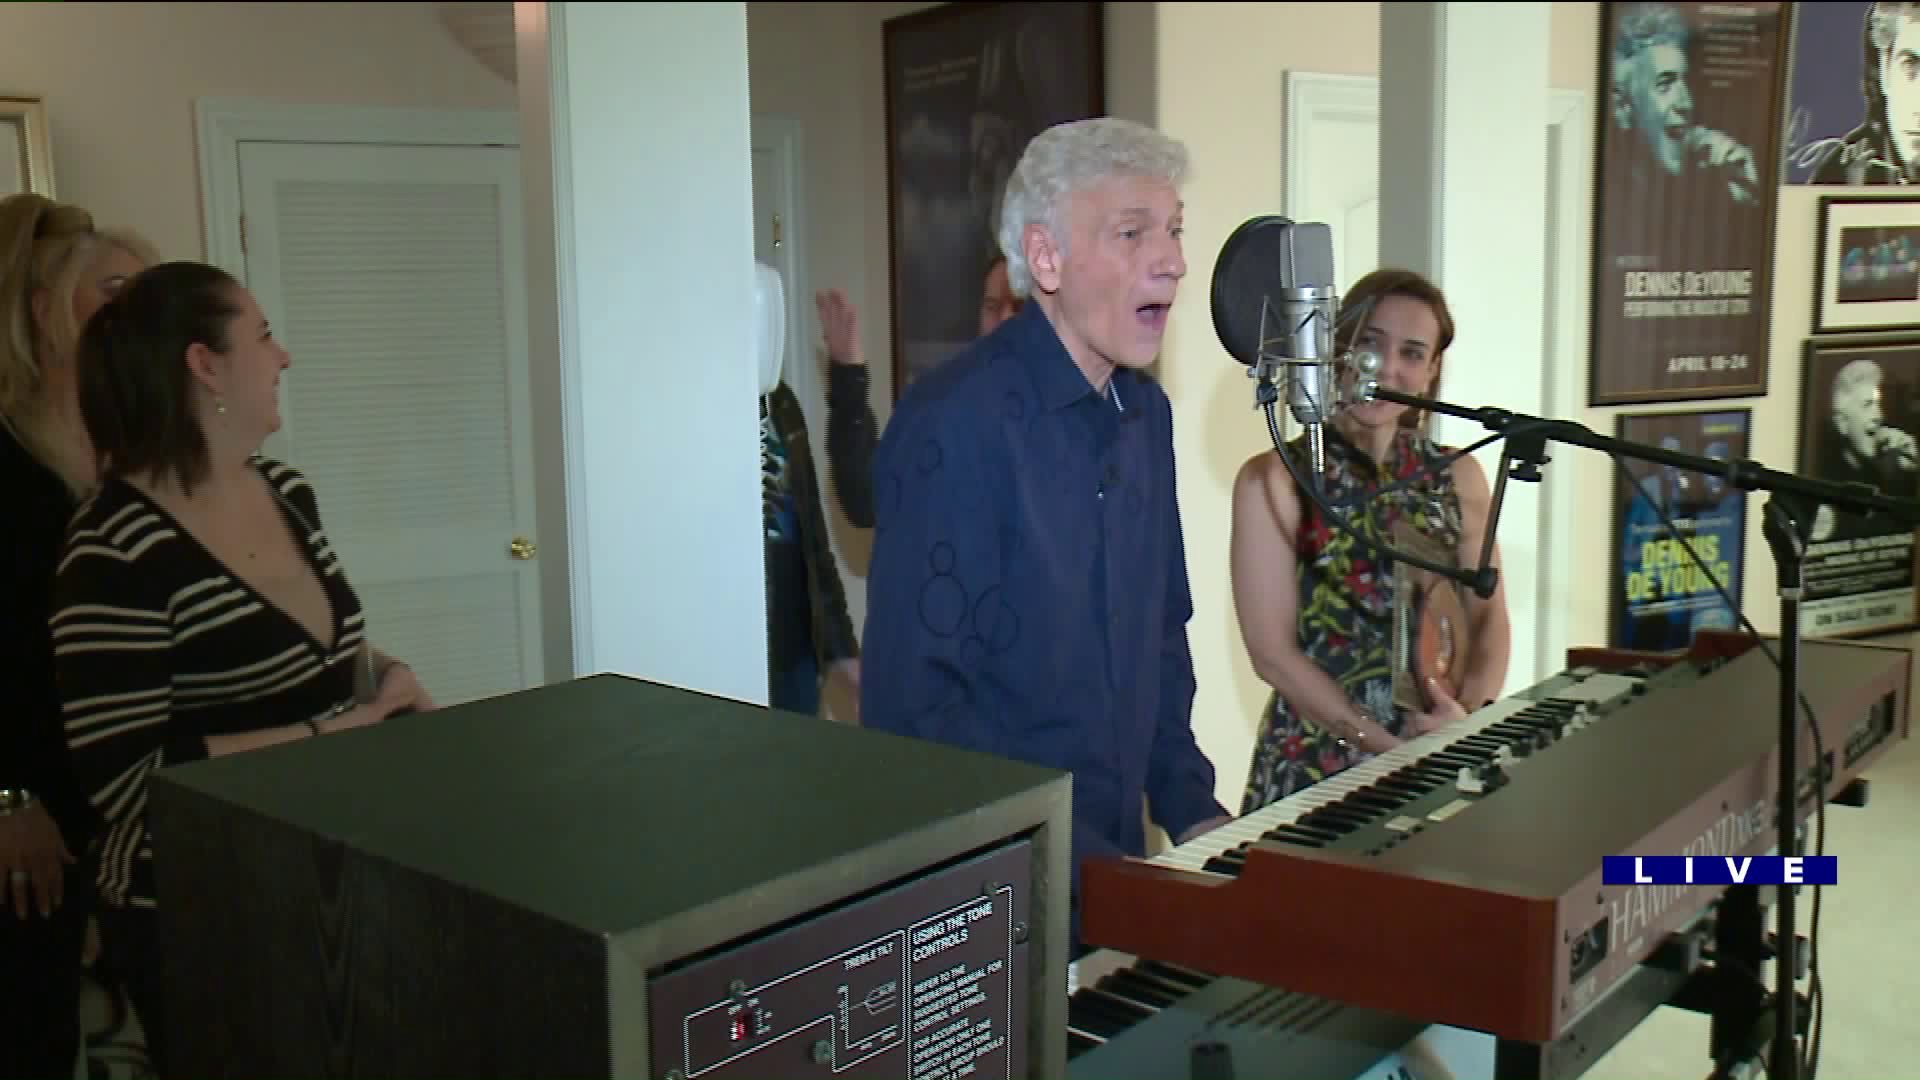 Around Town gives us an inside look into Dennis DeYoung’s house